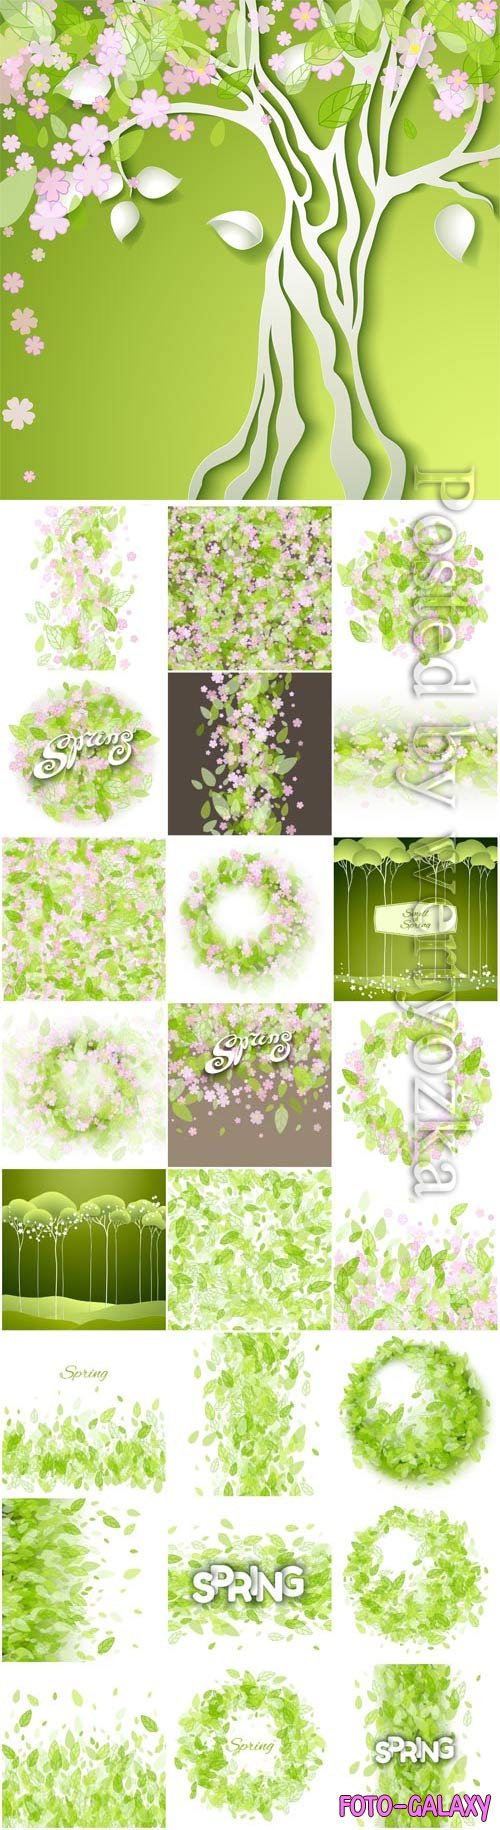 Green leaves and spring flowers in vector